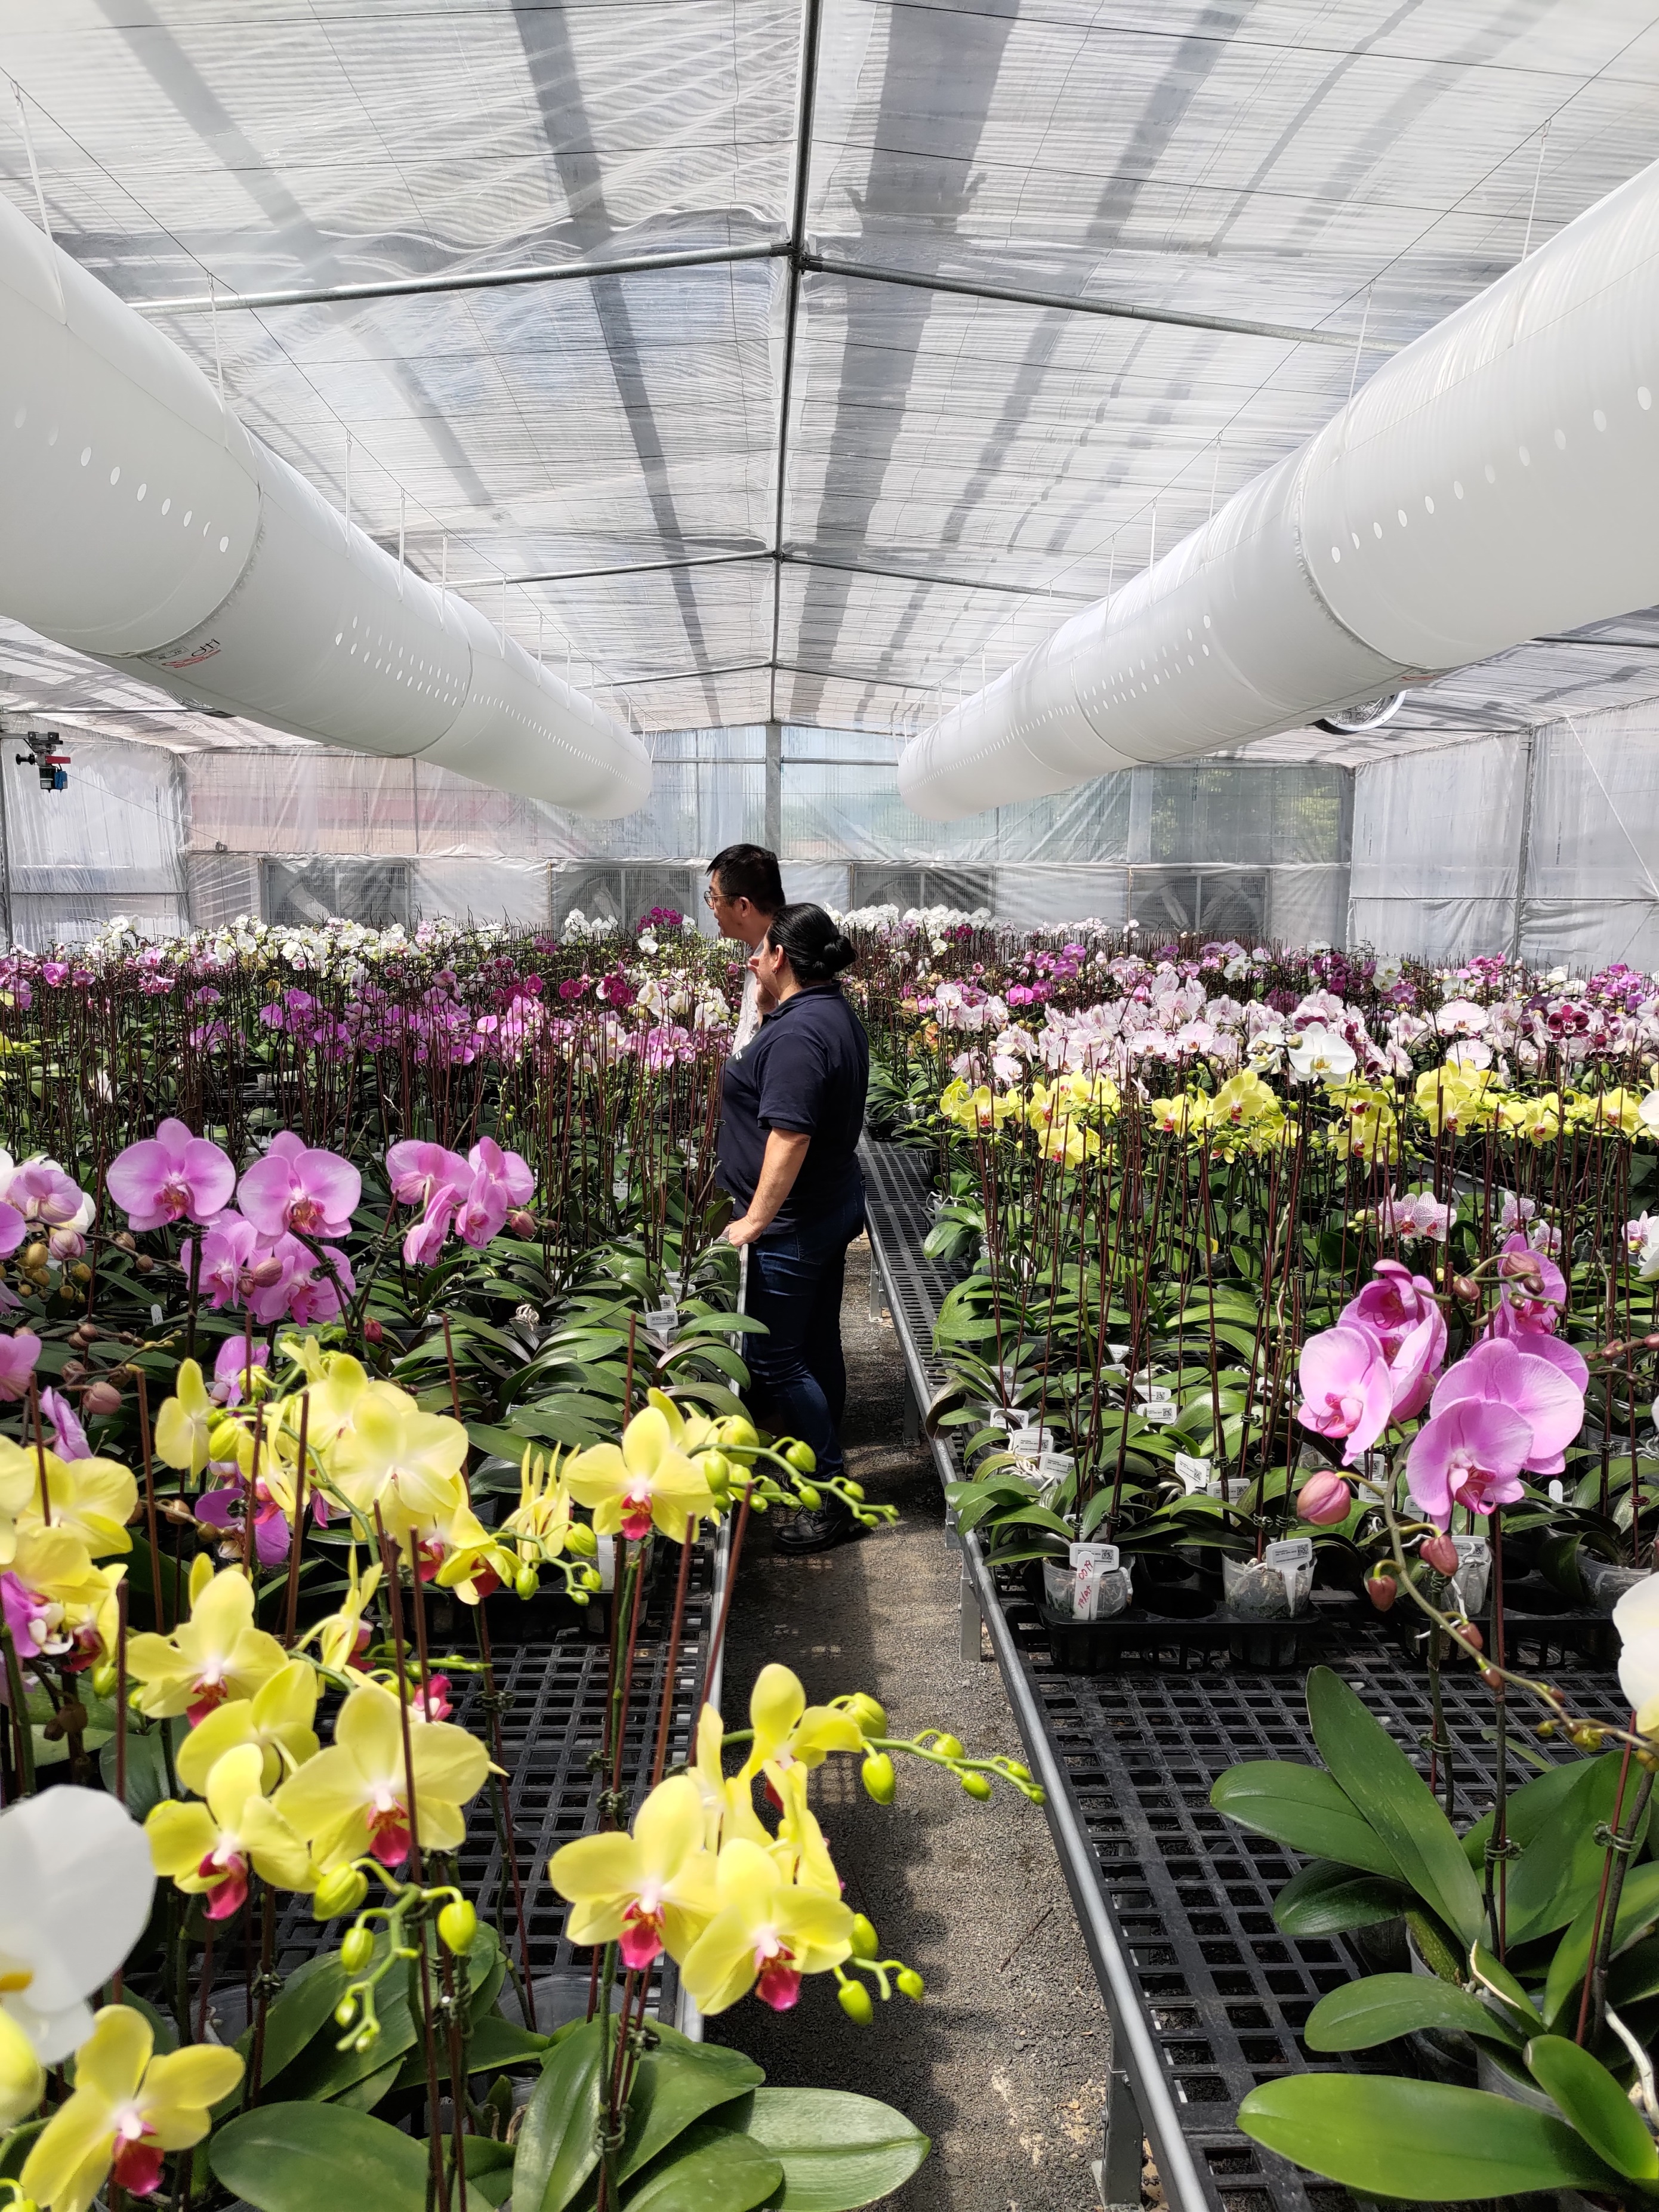 Project to Strengthen Capacity for Commercial Production and Operation of Orchids